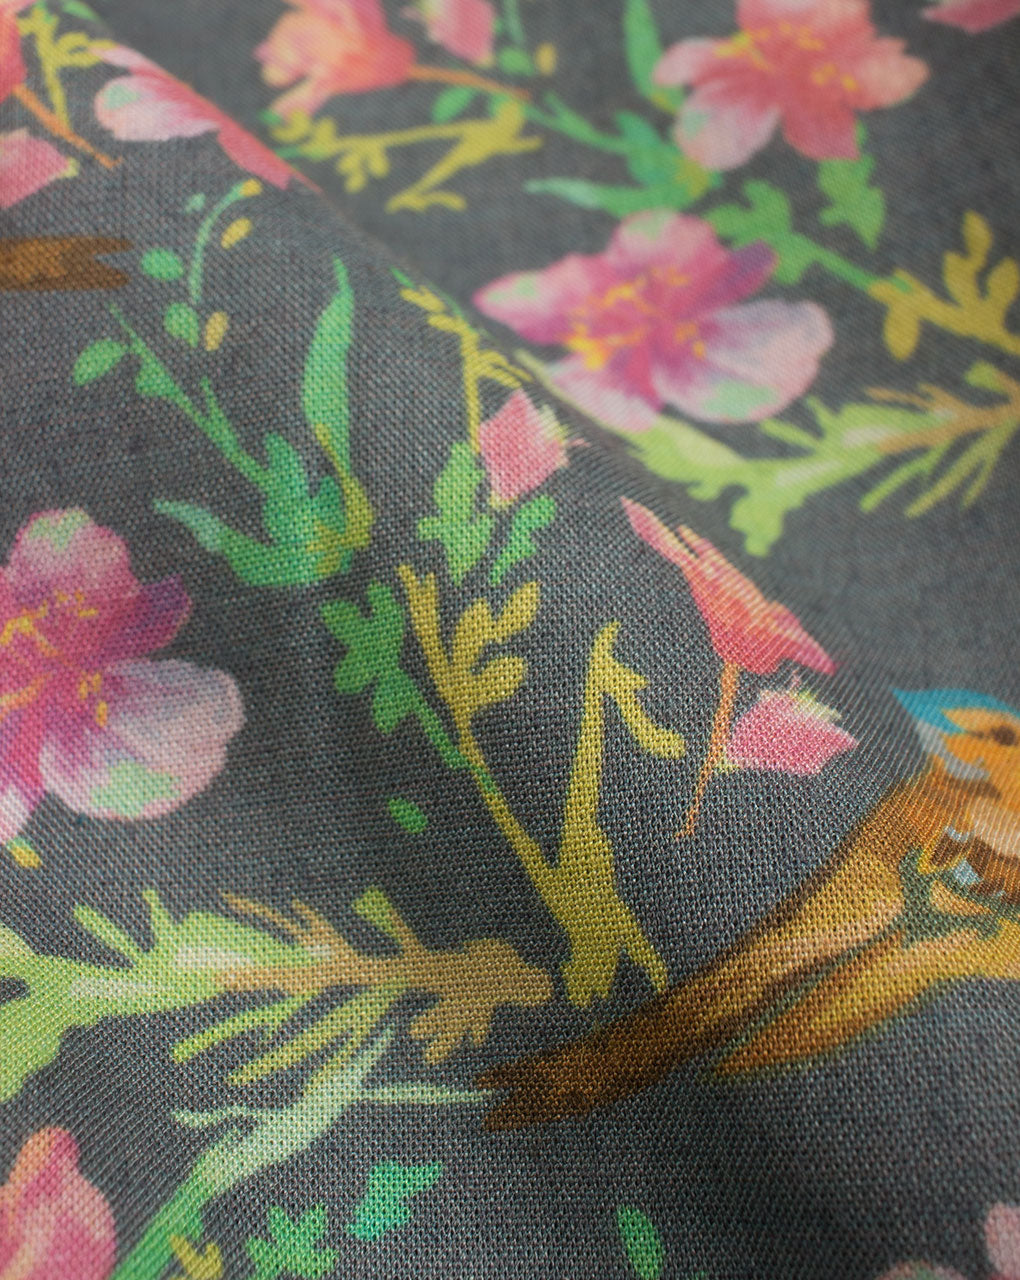 Floral Digital Print Certified Antimicrobial Rayon Fabric - Fabriclore.com